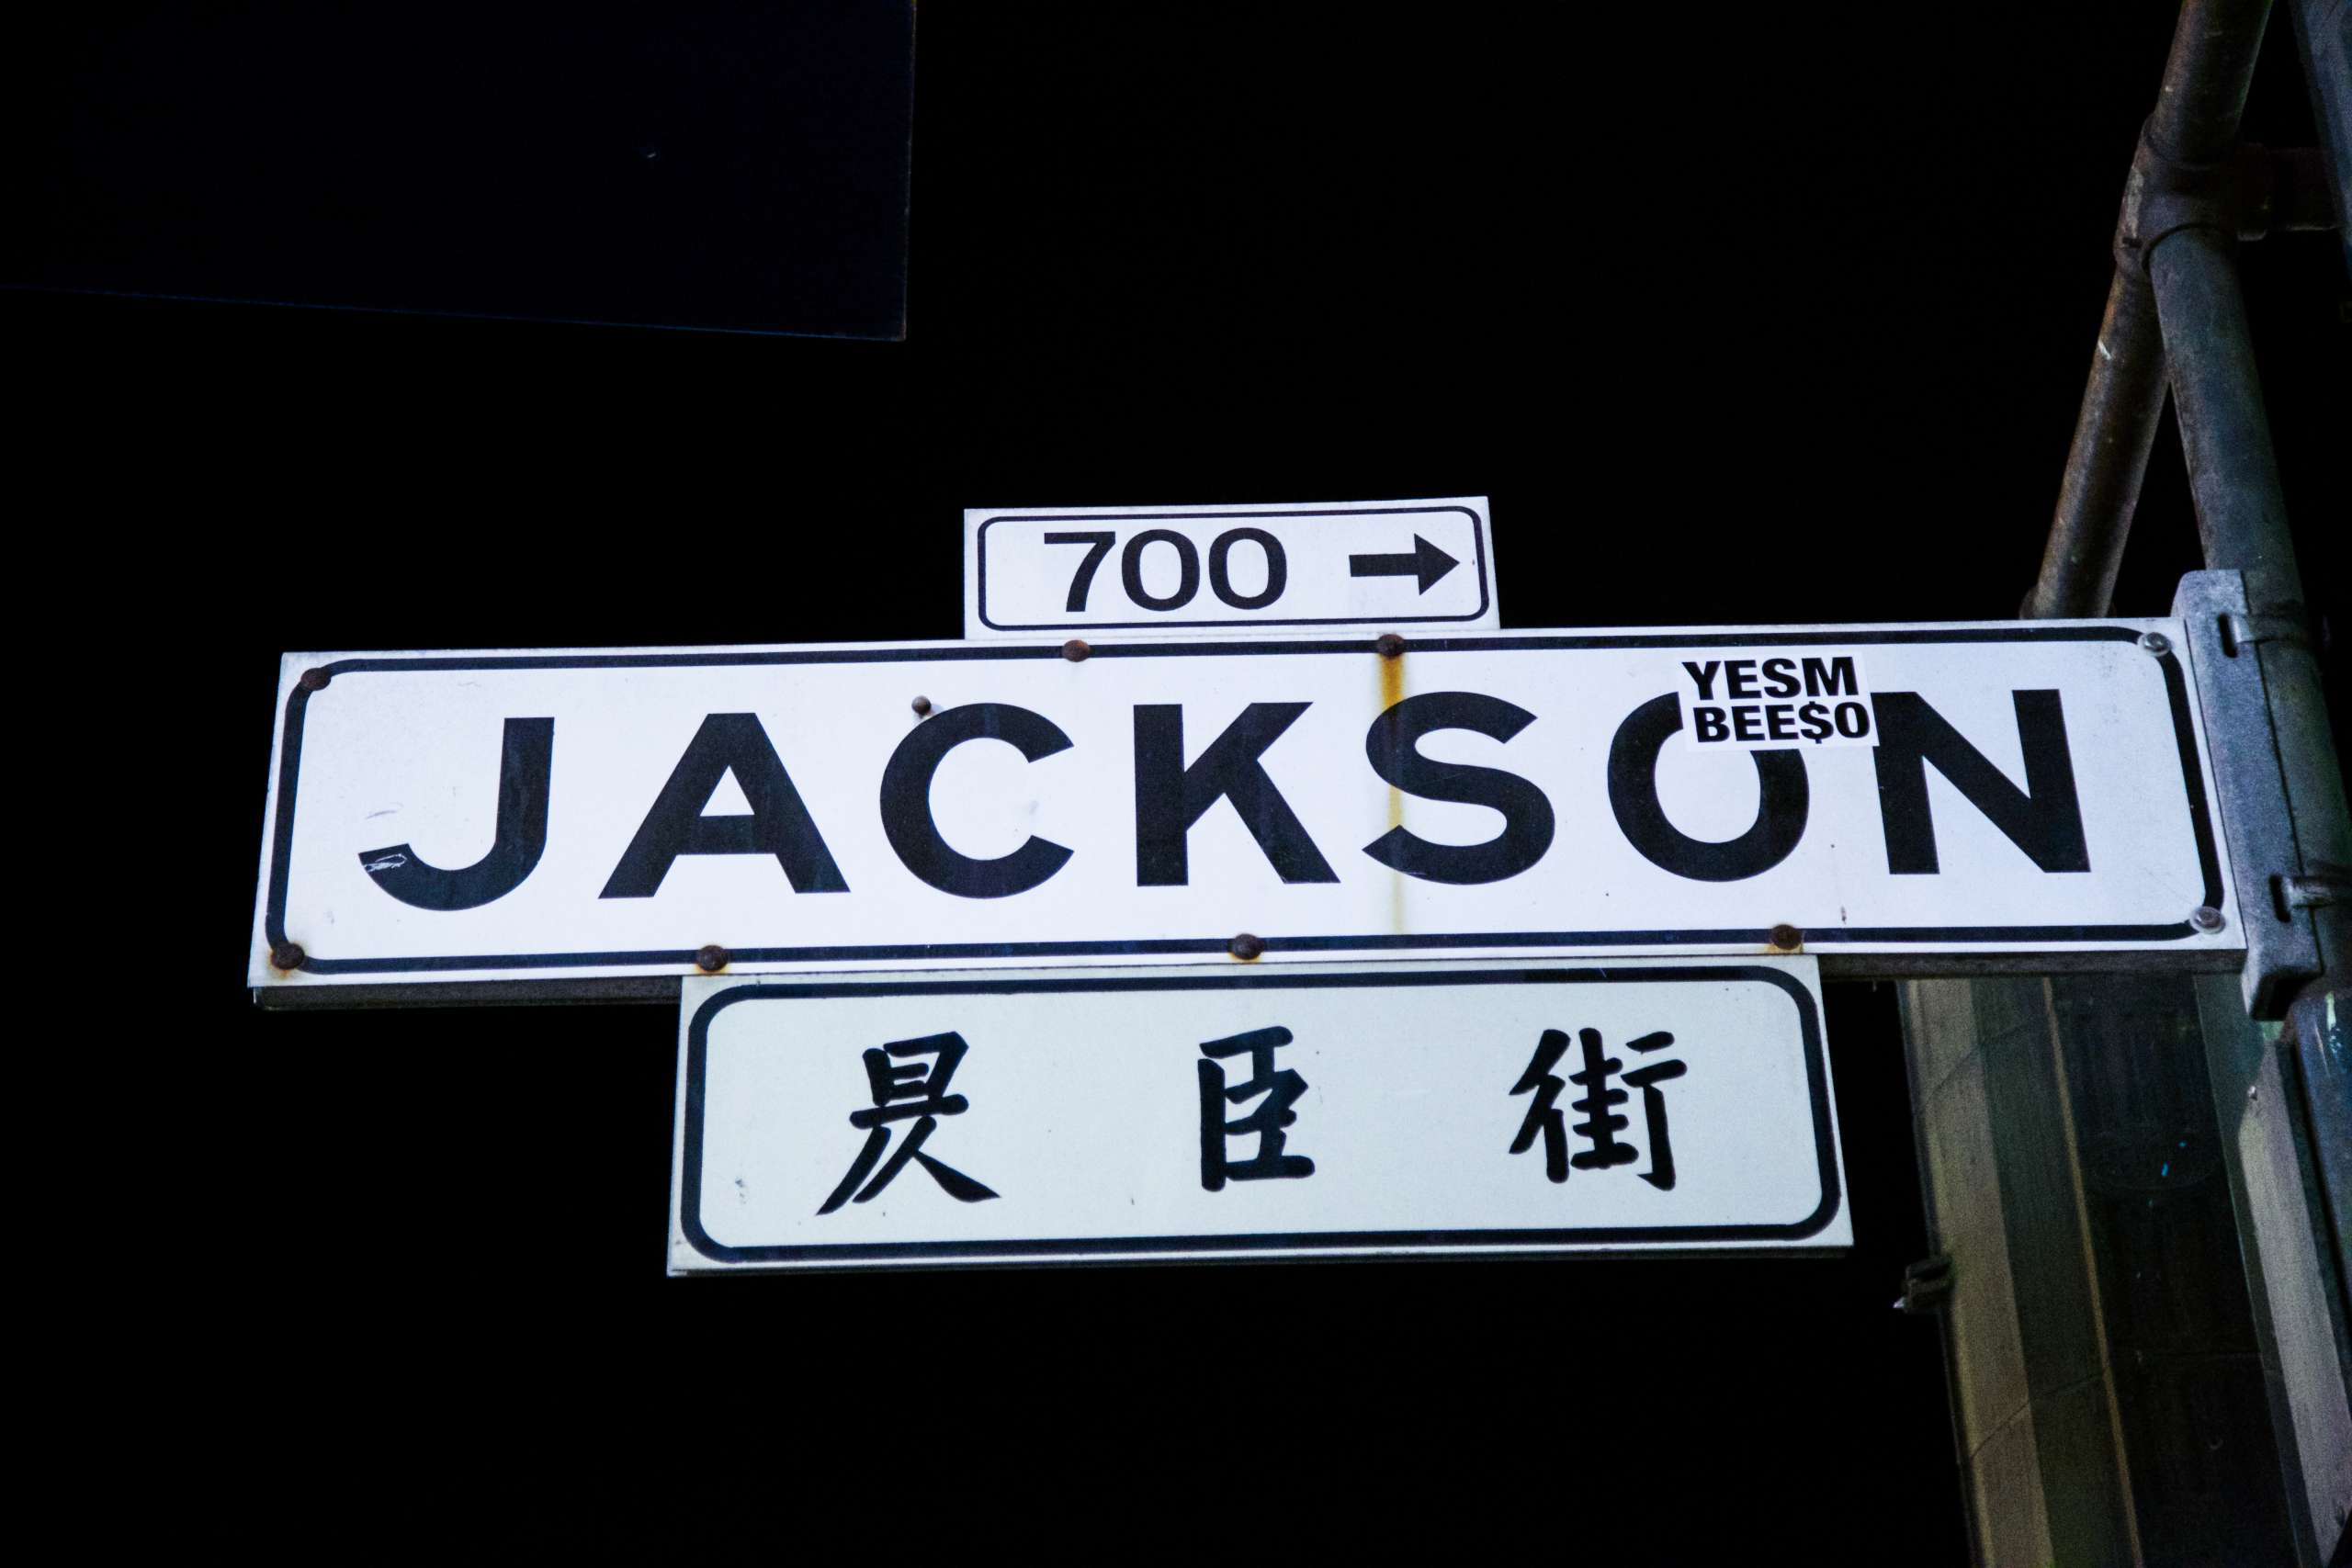 Street sign in black and white.